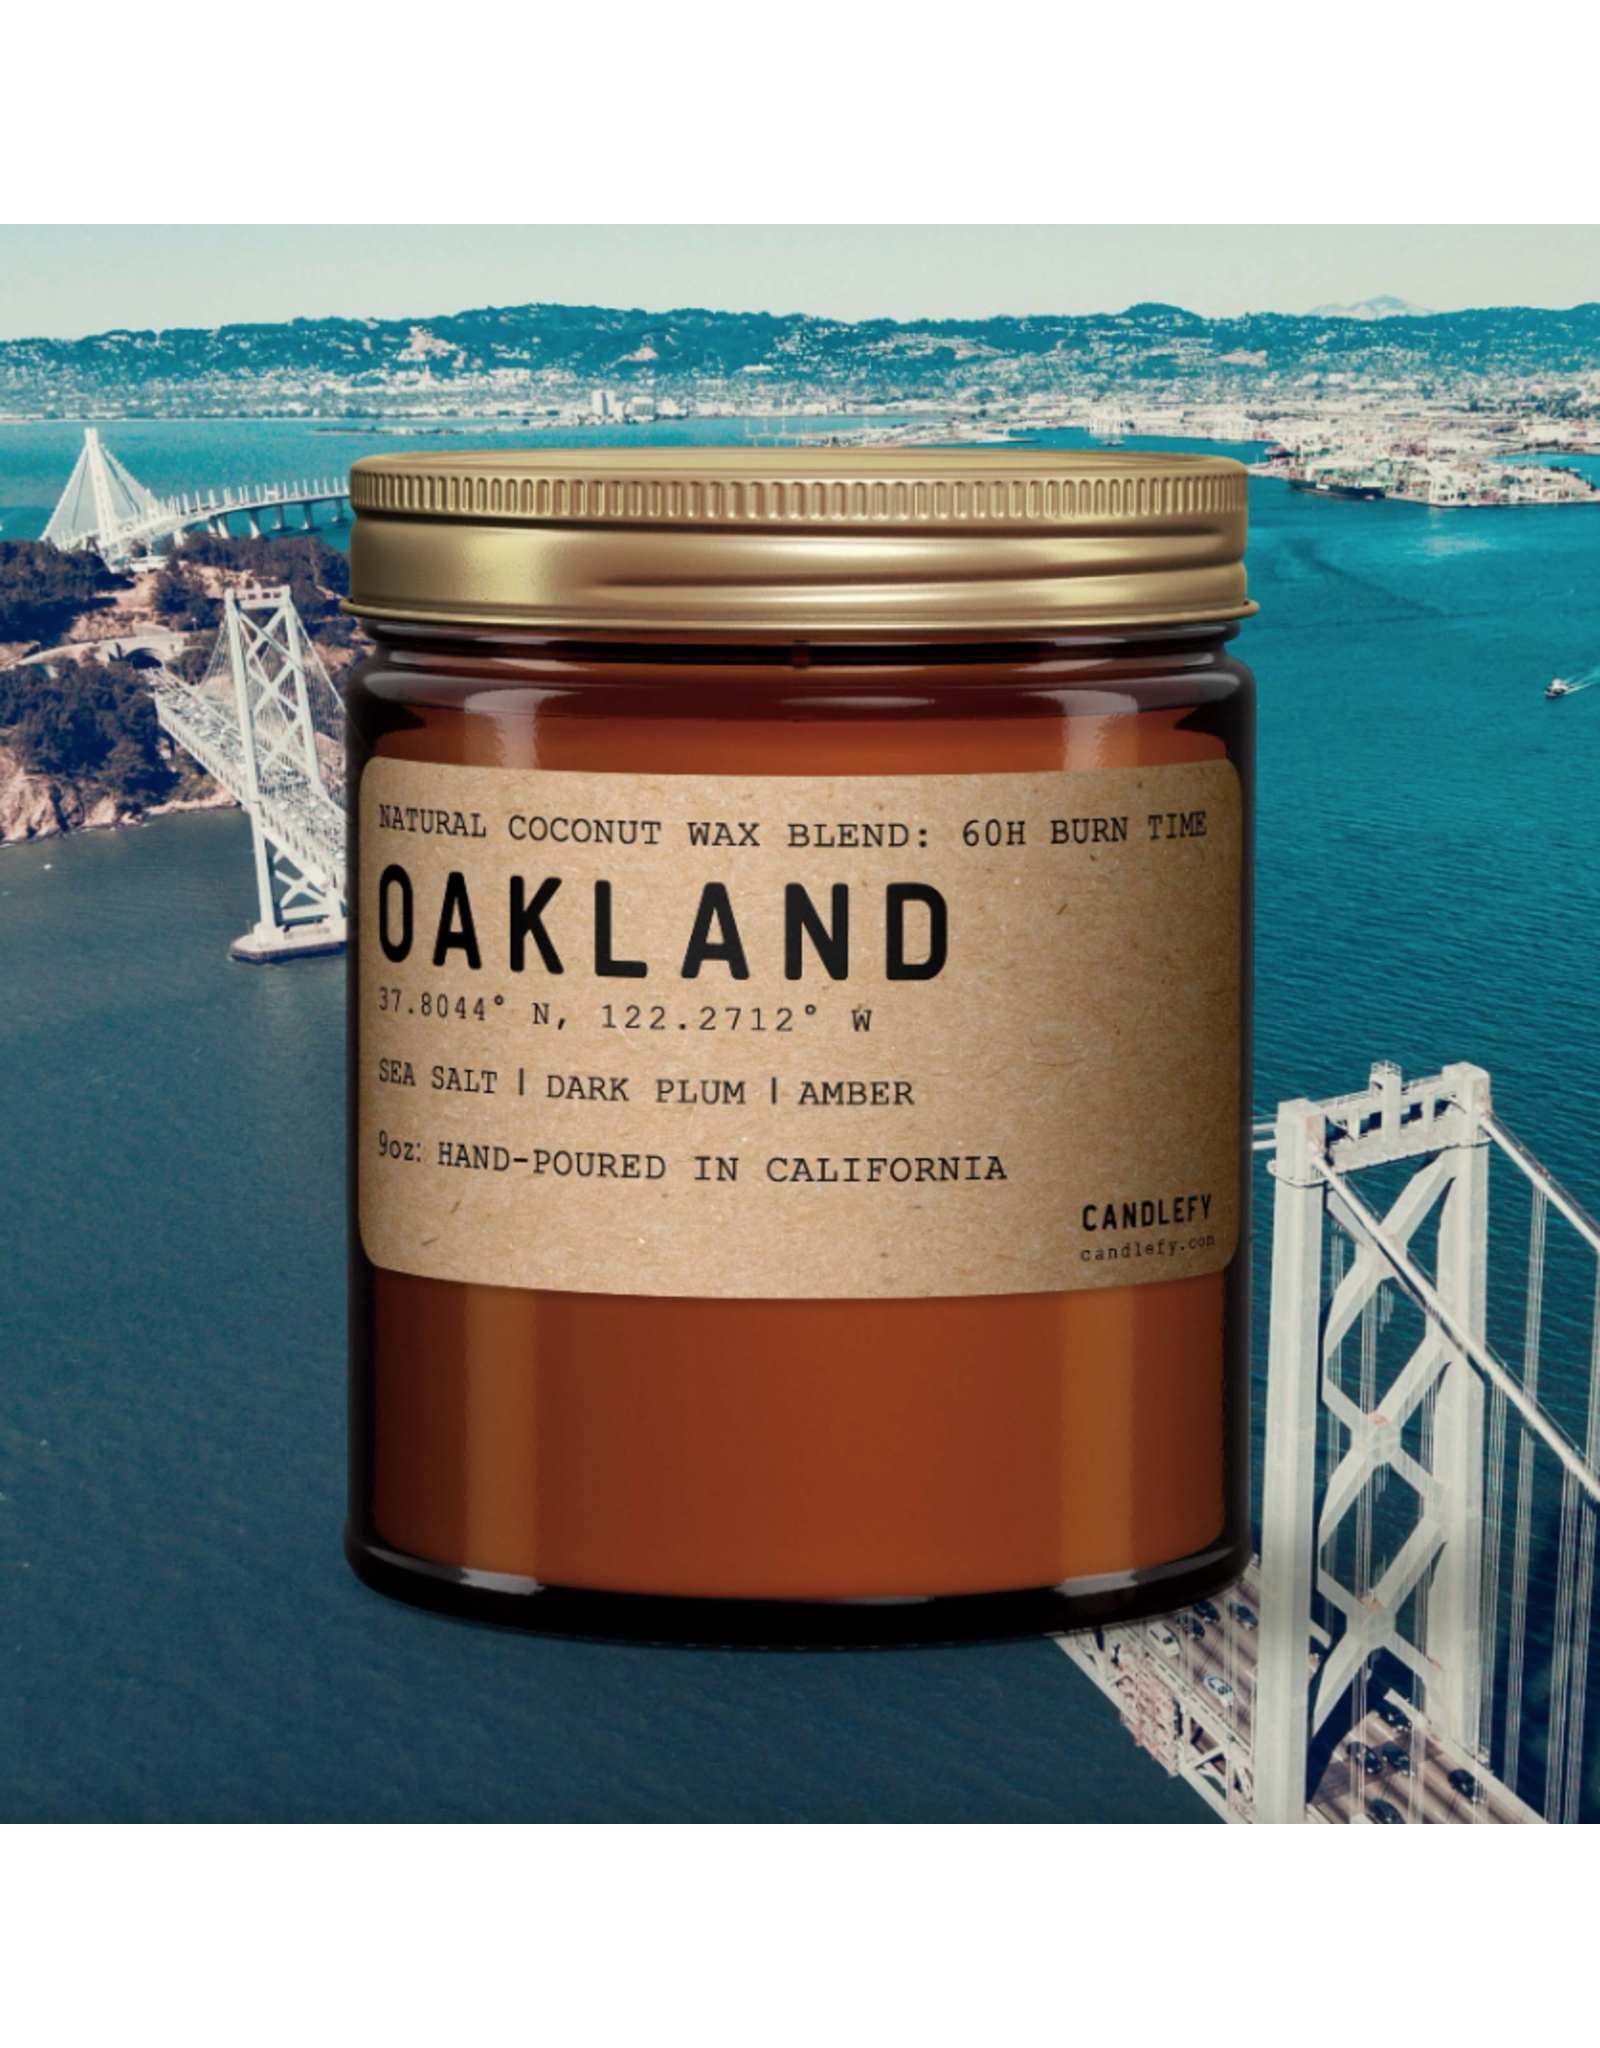 Candlefy Oakland California Scented Candle